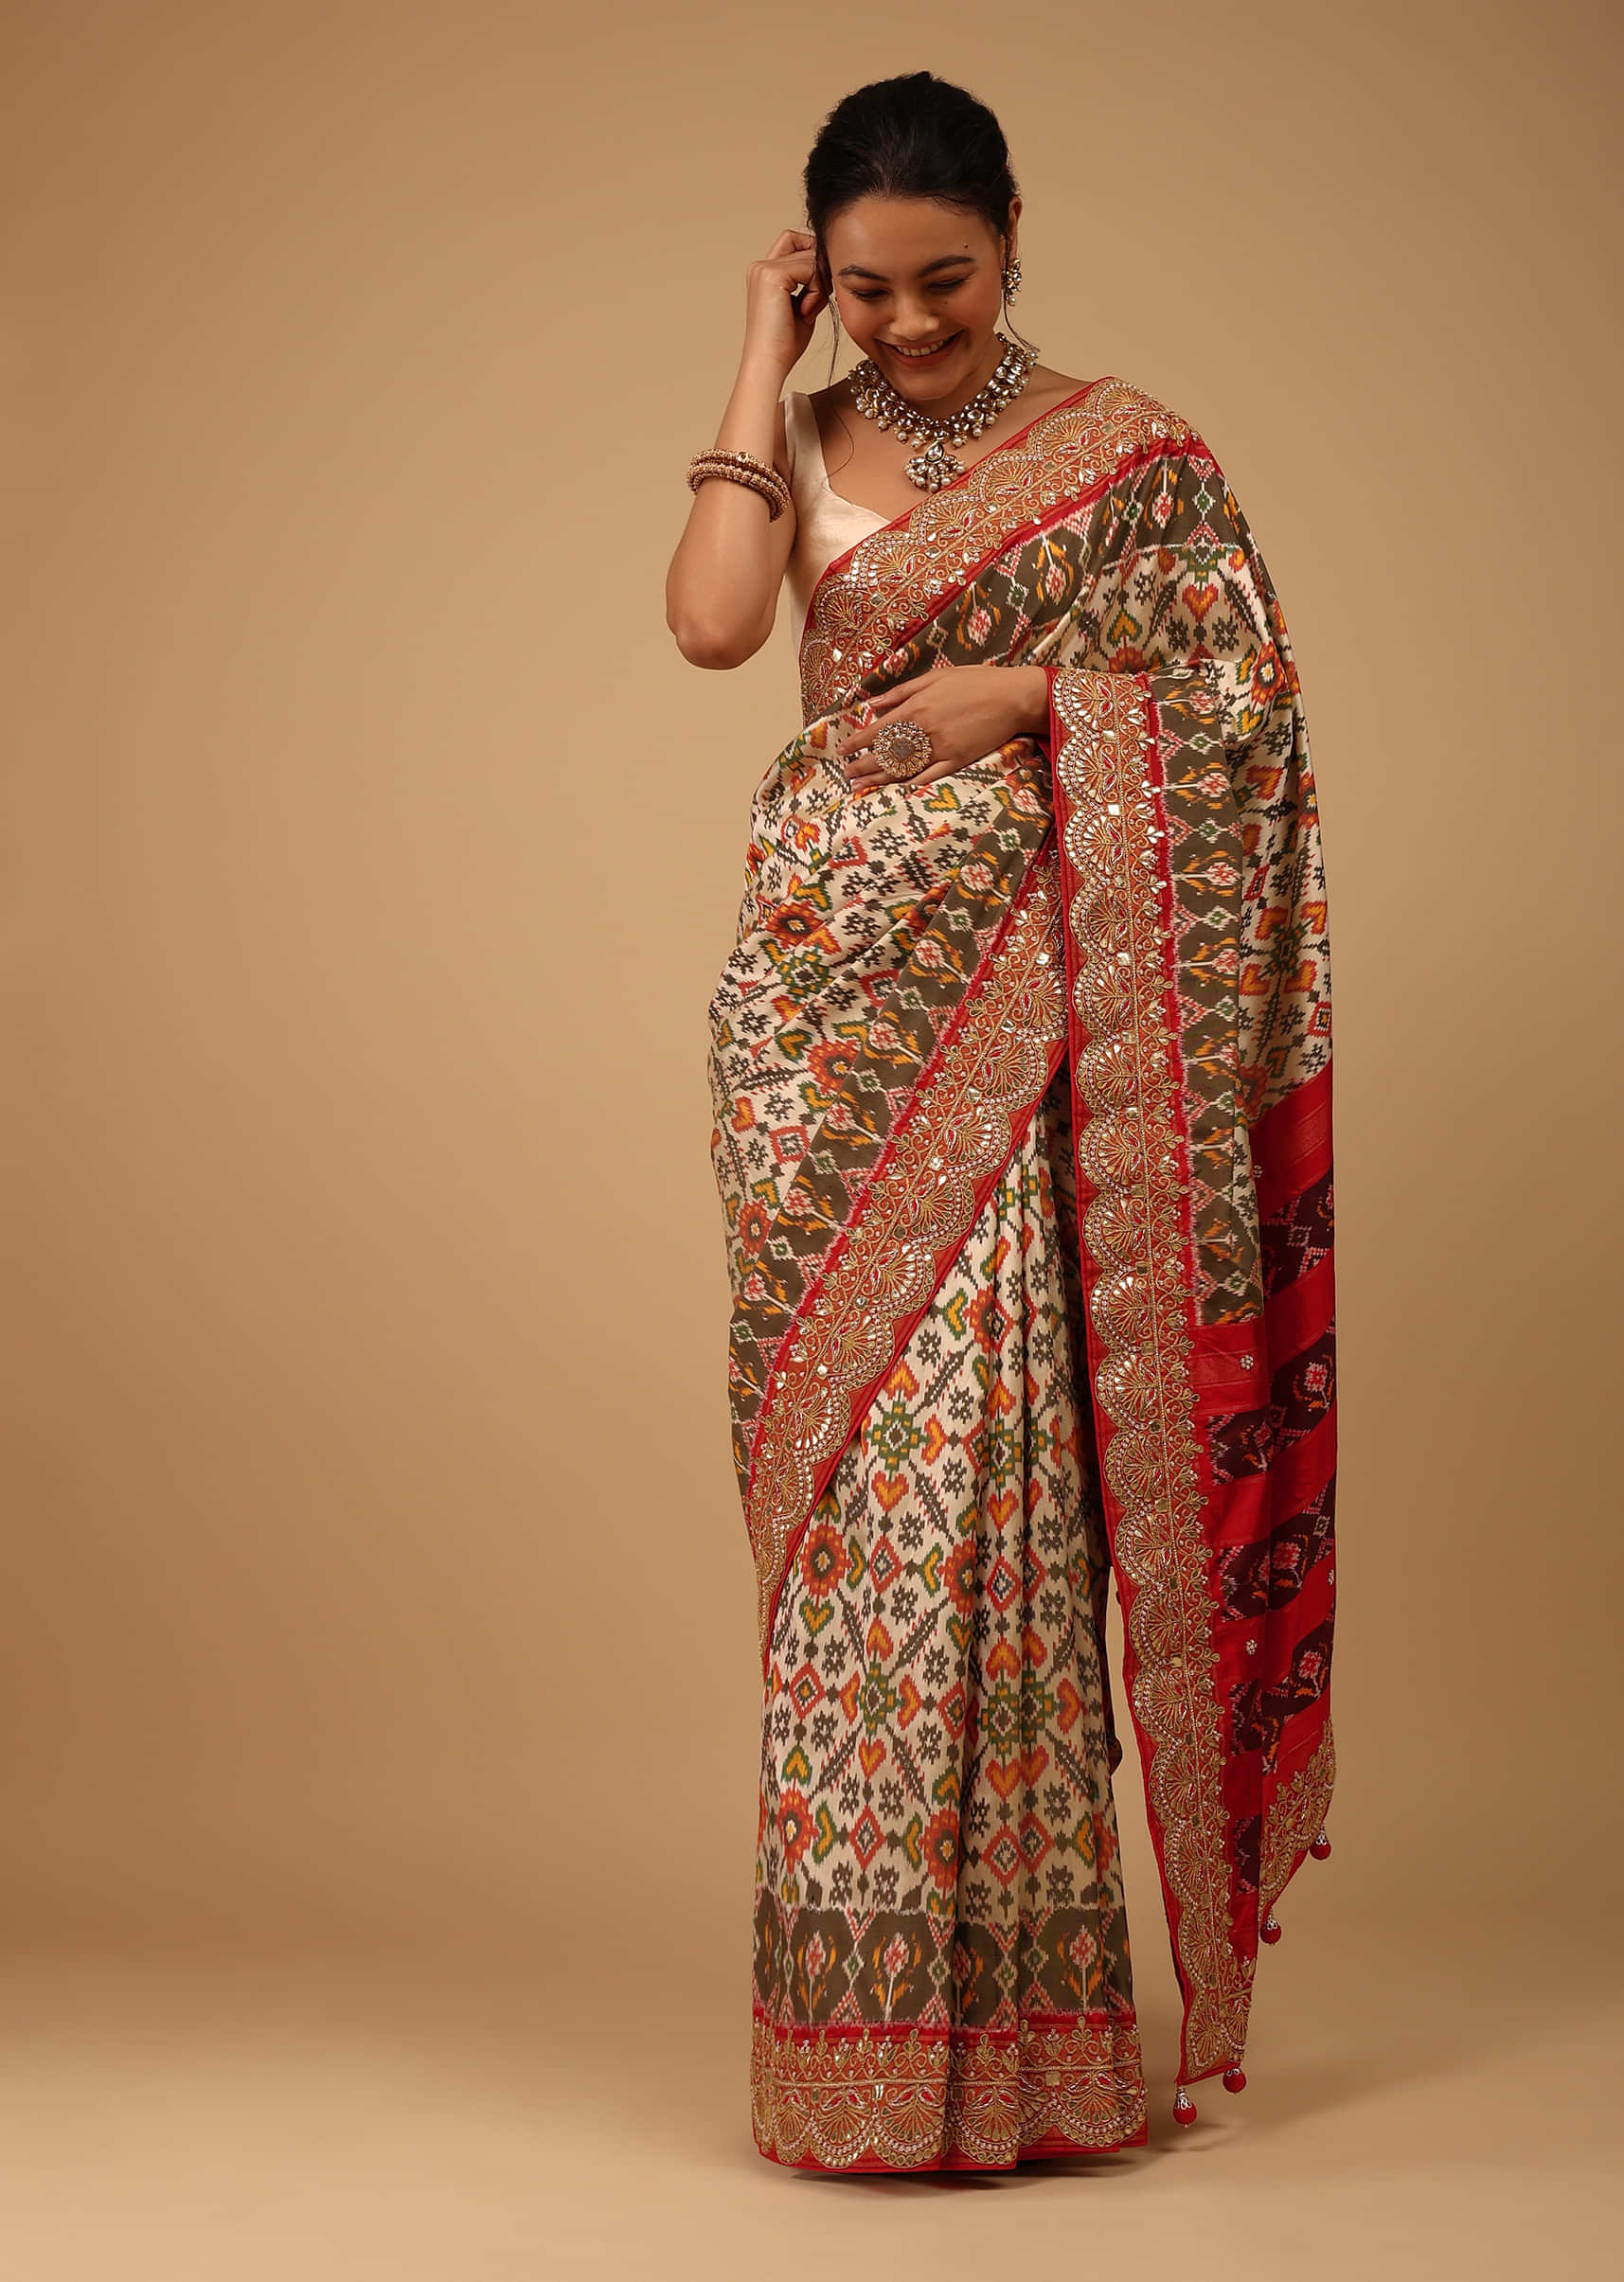 Beige White Saree In Pure Silk With Handloom Patola Ikat Weave